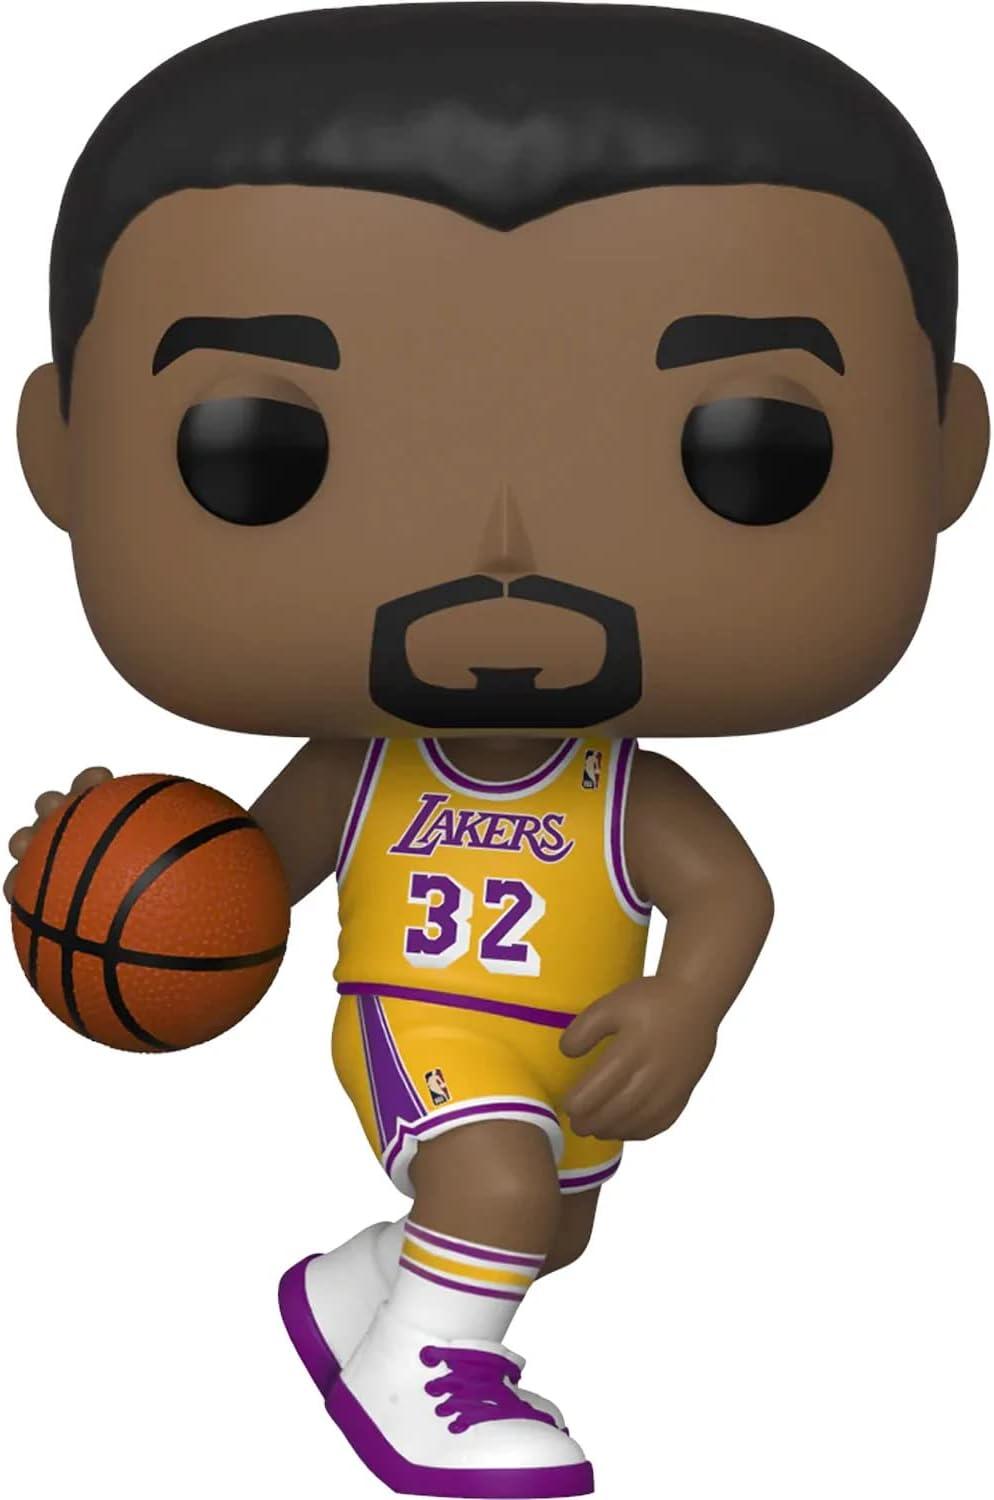 LeBron James #66 Facsimile Signed Reprint Laser Autographed Funko POP!  Basketball NBA: Los Angeles Lakers Figurine with Protector Case